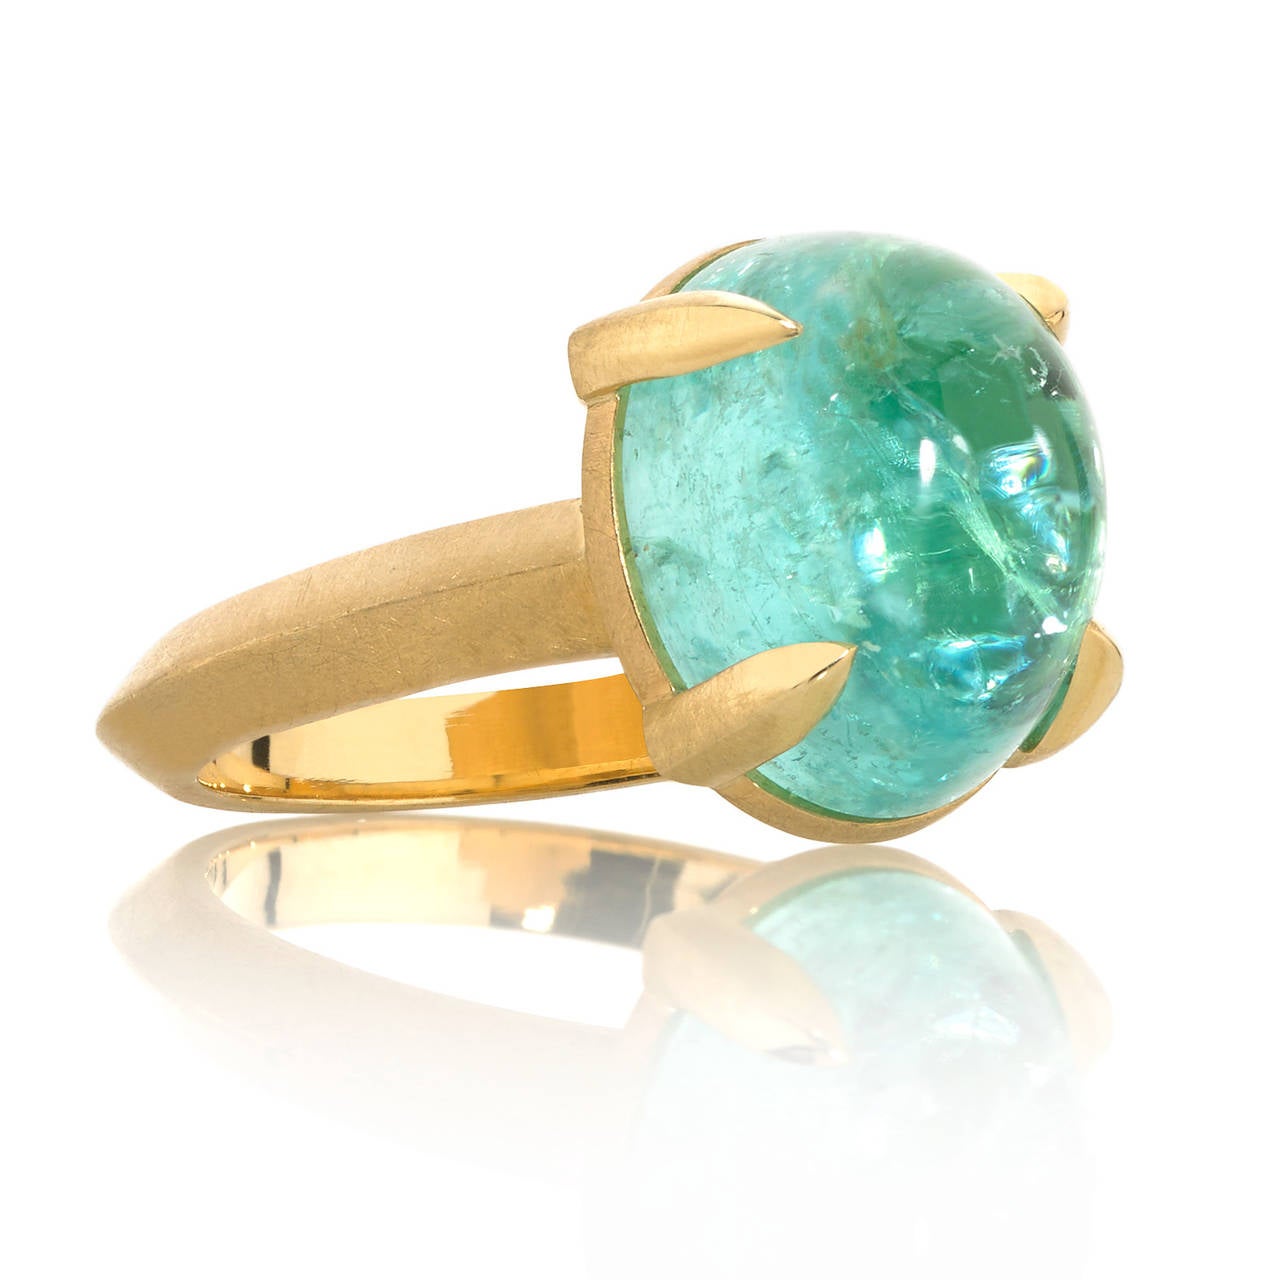 One-of-a-Kind Cosmic Ring handcrafted in matte 18k yellow gold with an extraordinary cabochon-cut Paraiba tourmaline that has a whole world within the gem. Size 5.5 (Can be Sized).